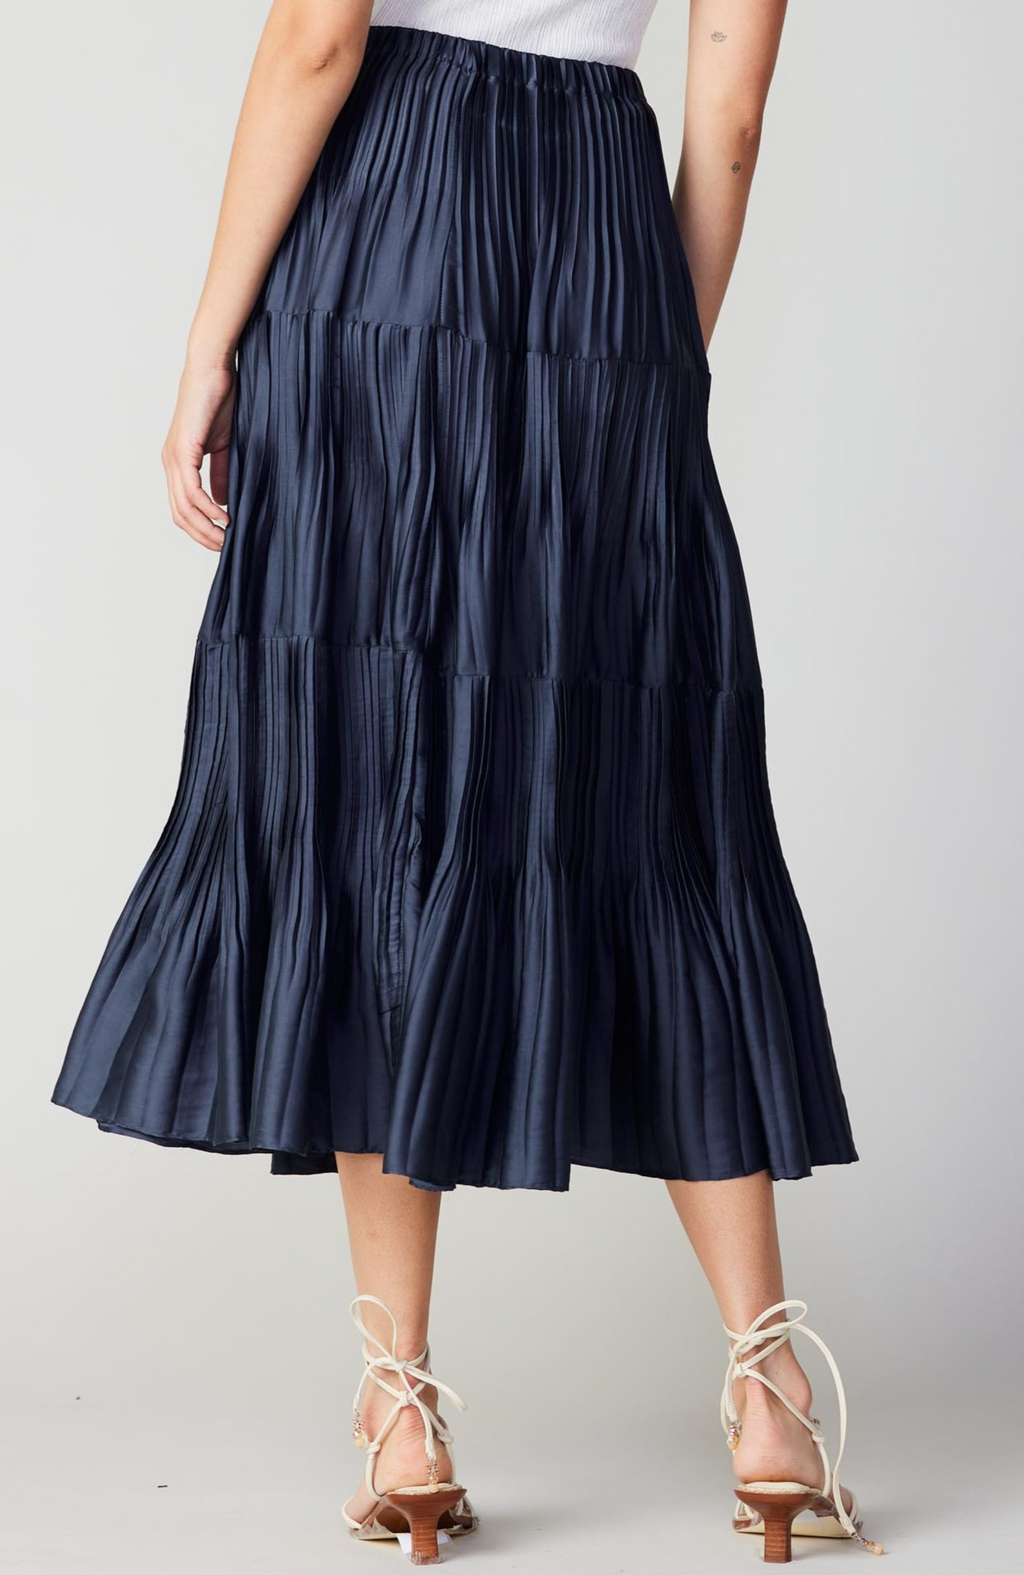 Current Air - Special Pleated Long Skirt